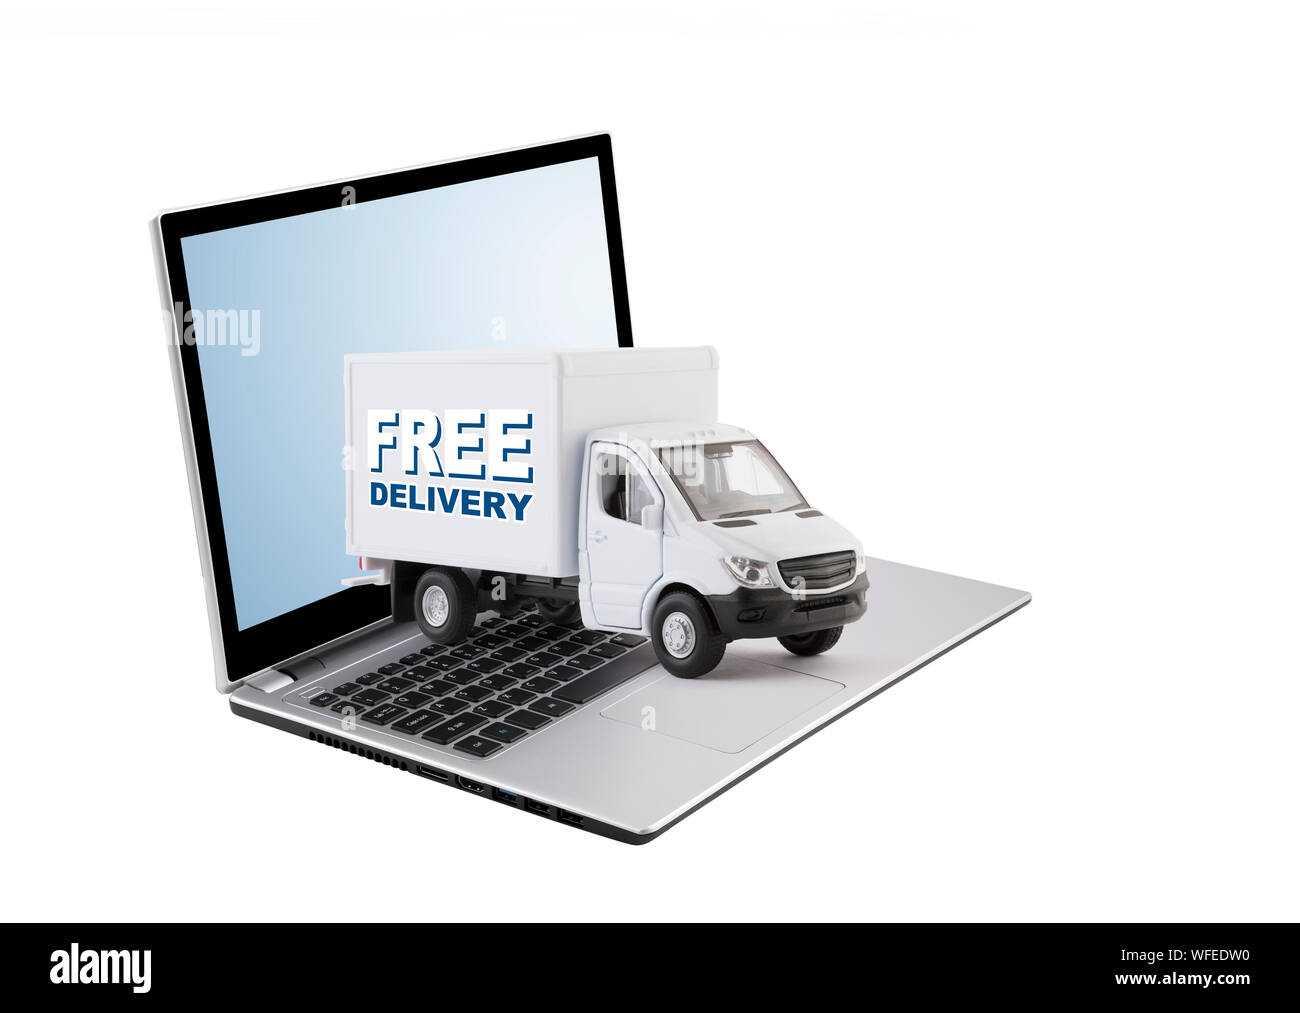 Free delivery cargo truck on laptop isolated on white background Stock Photo